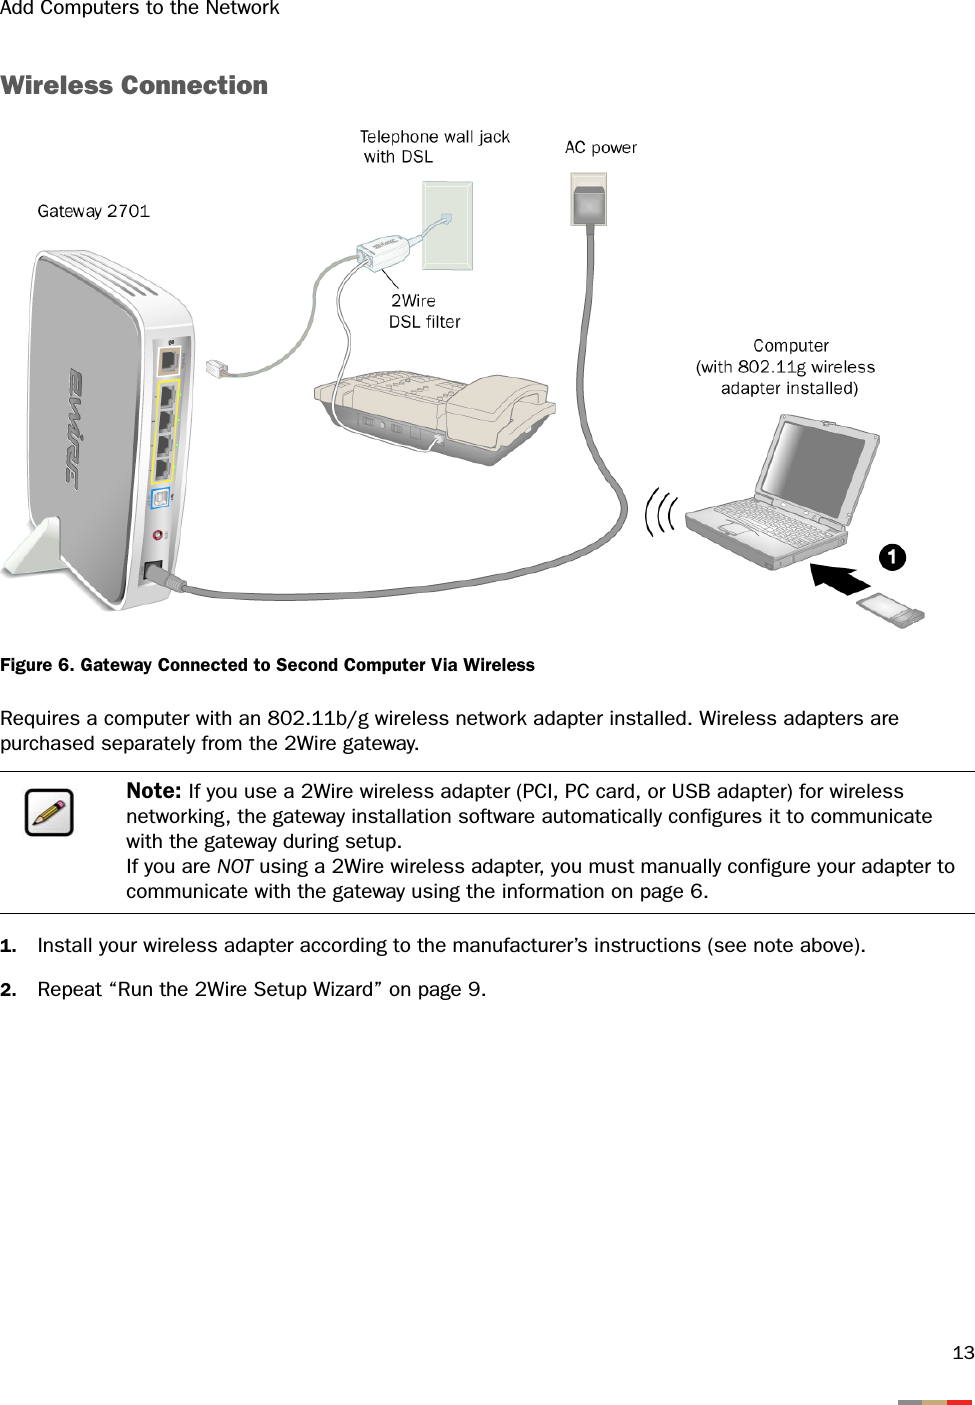 Add Computers to the Network13Wireless ConnectionFigure 6. Gateway Connected to Second Computer Via WirelessRequires a computer with an 802.11b/g wireless network adapter installed. Wireless adapters are purchased separately from the 2Wire gateway.1. Install your wireless adapter according to the manufacturer’s instructions (see note above).2. Repeat “Run the 2Wire Setup Wizard” on page 9.Note: If you use a 2Wire wireless adapter (PCI, PC card, or USB adapter) for wireless networking, the gateway installation software automatically configures it to communicate with the gateway during setup. If you are NOT using a 2Wire wireless adapter, you must manually configure your adapter to communicate with the gateway using the information on page 6.